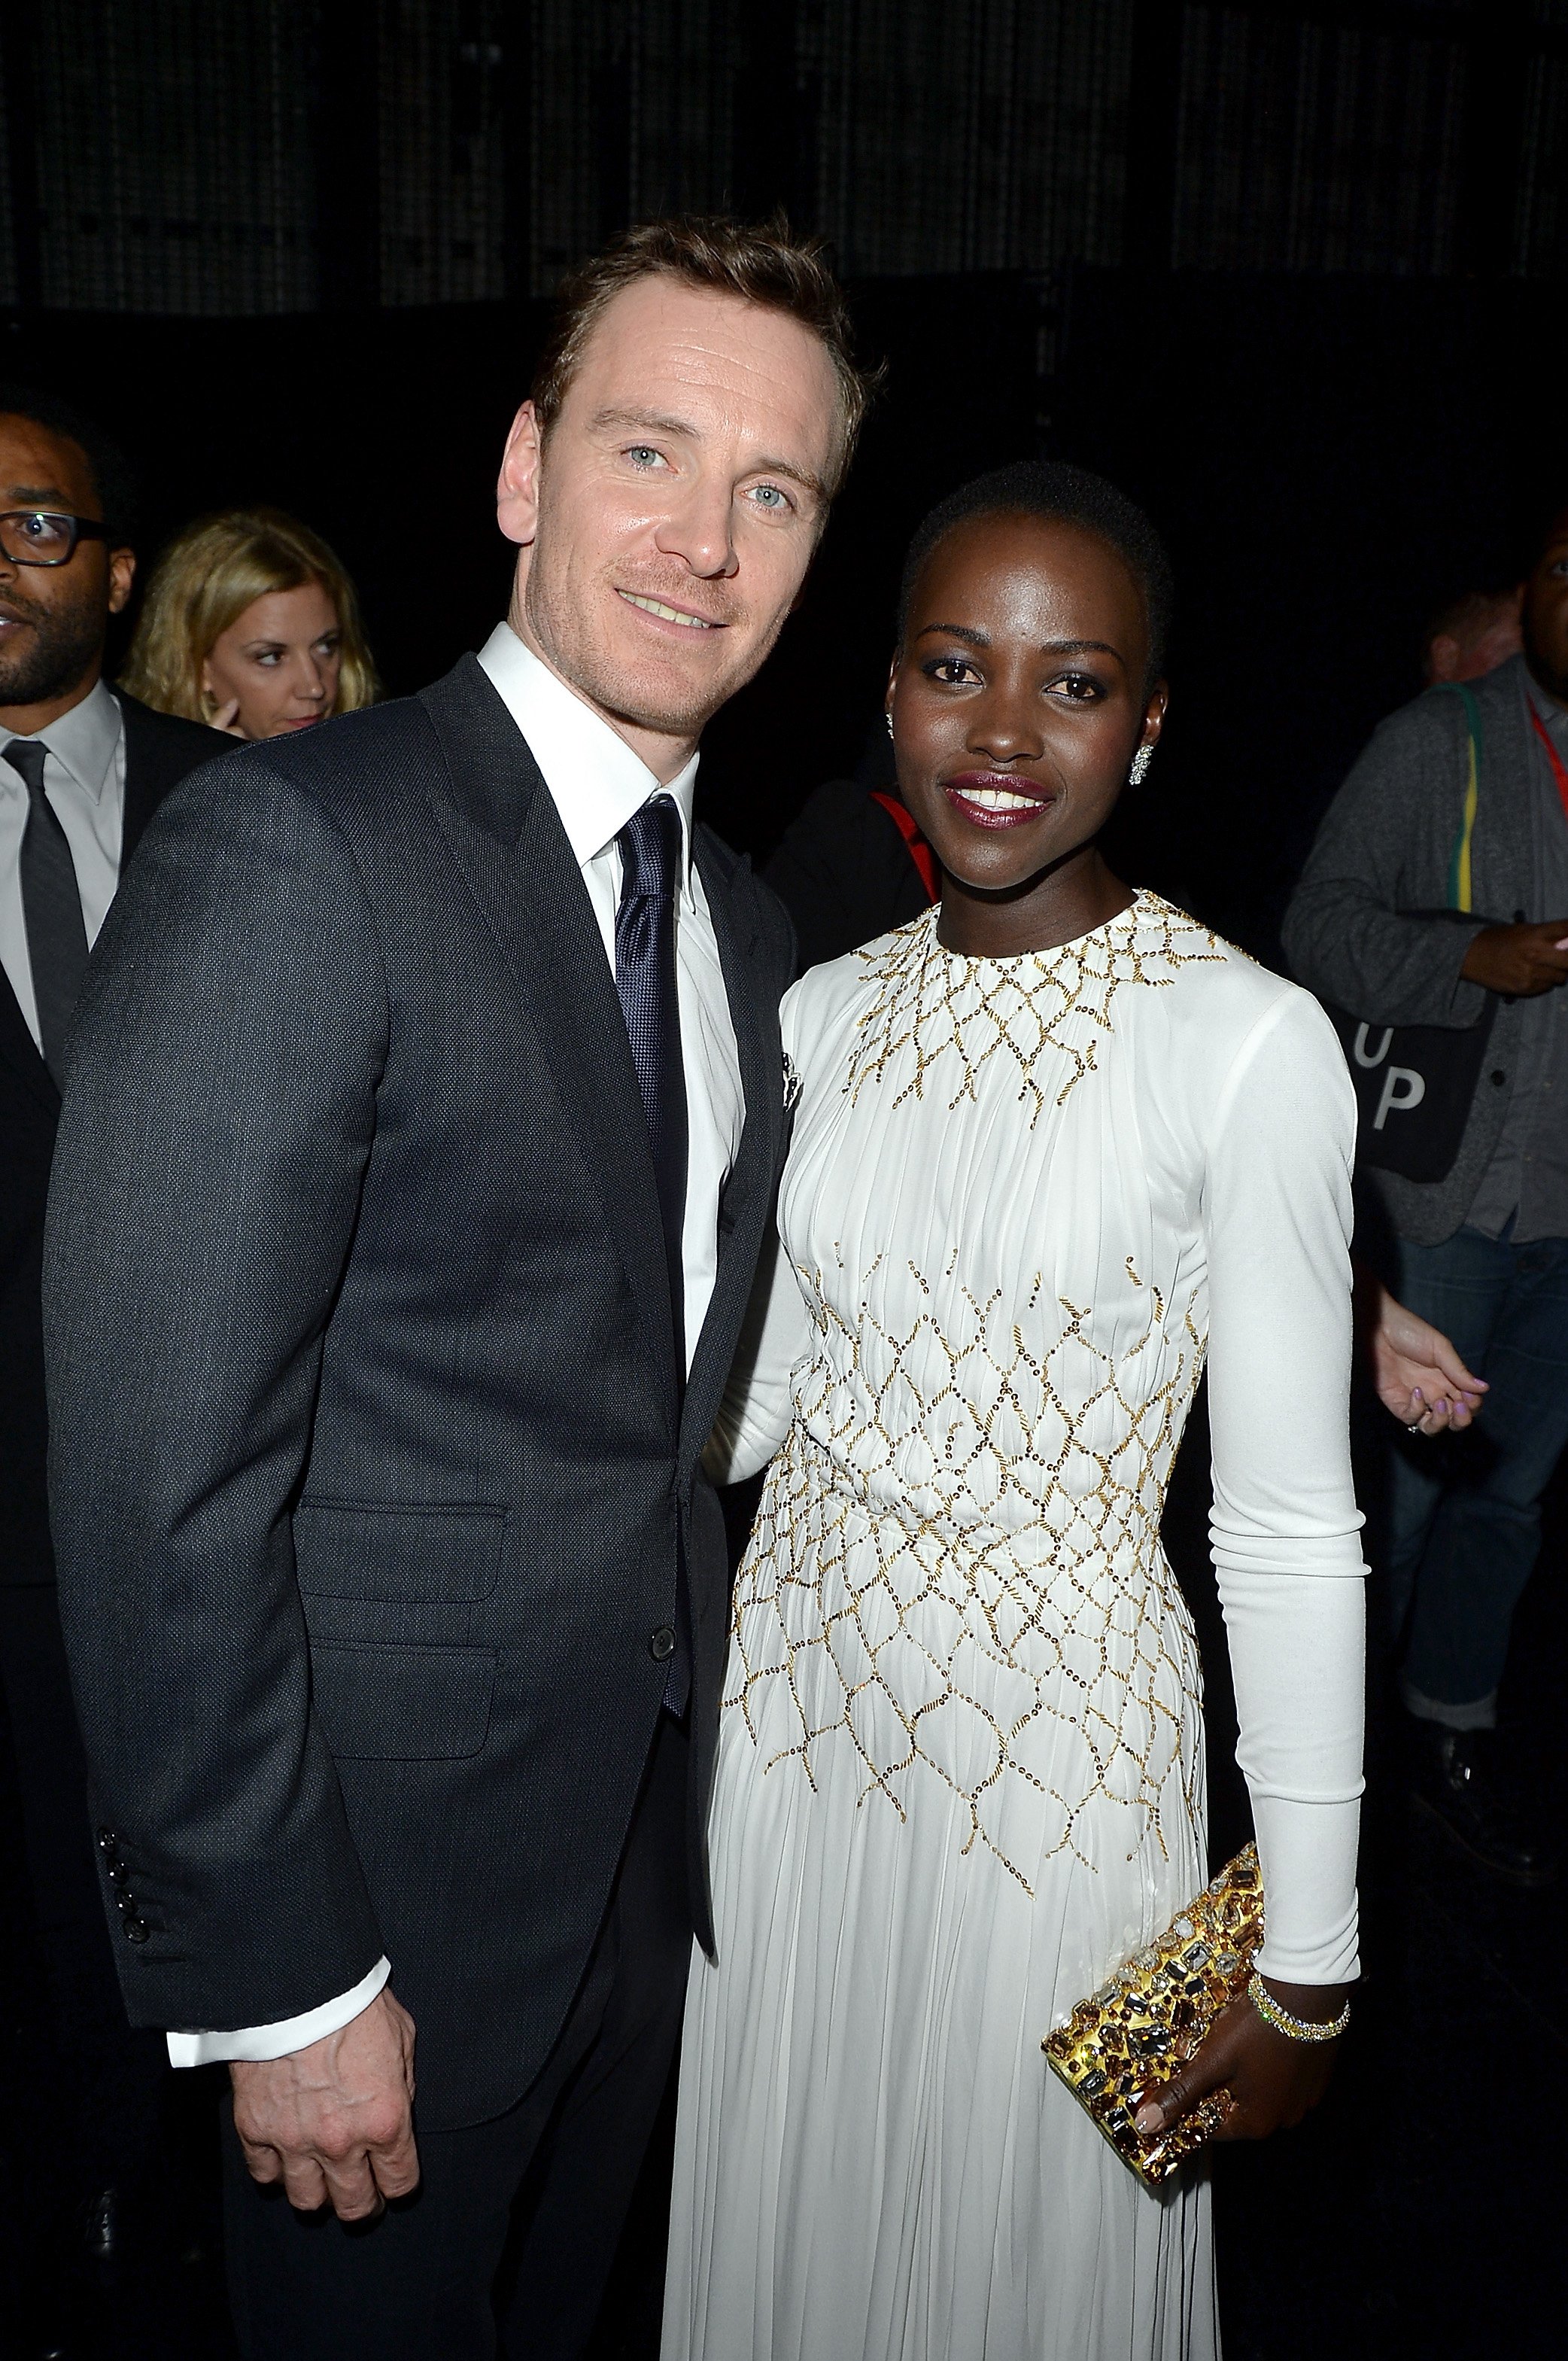 Michael Fassbender and Lupita Nyong'o at the premiere of "12 Years A Slave" during the 2013 Toronto International Film Festival on September 6, 2013 | Source: Getty Images